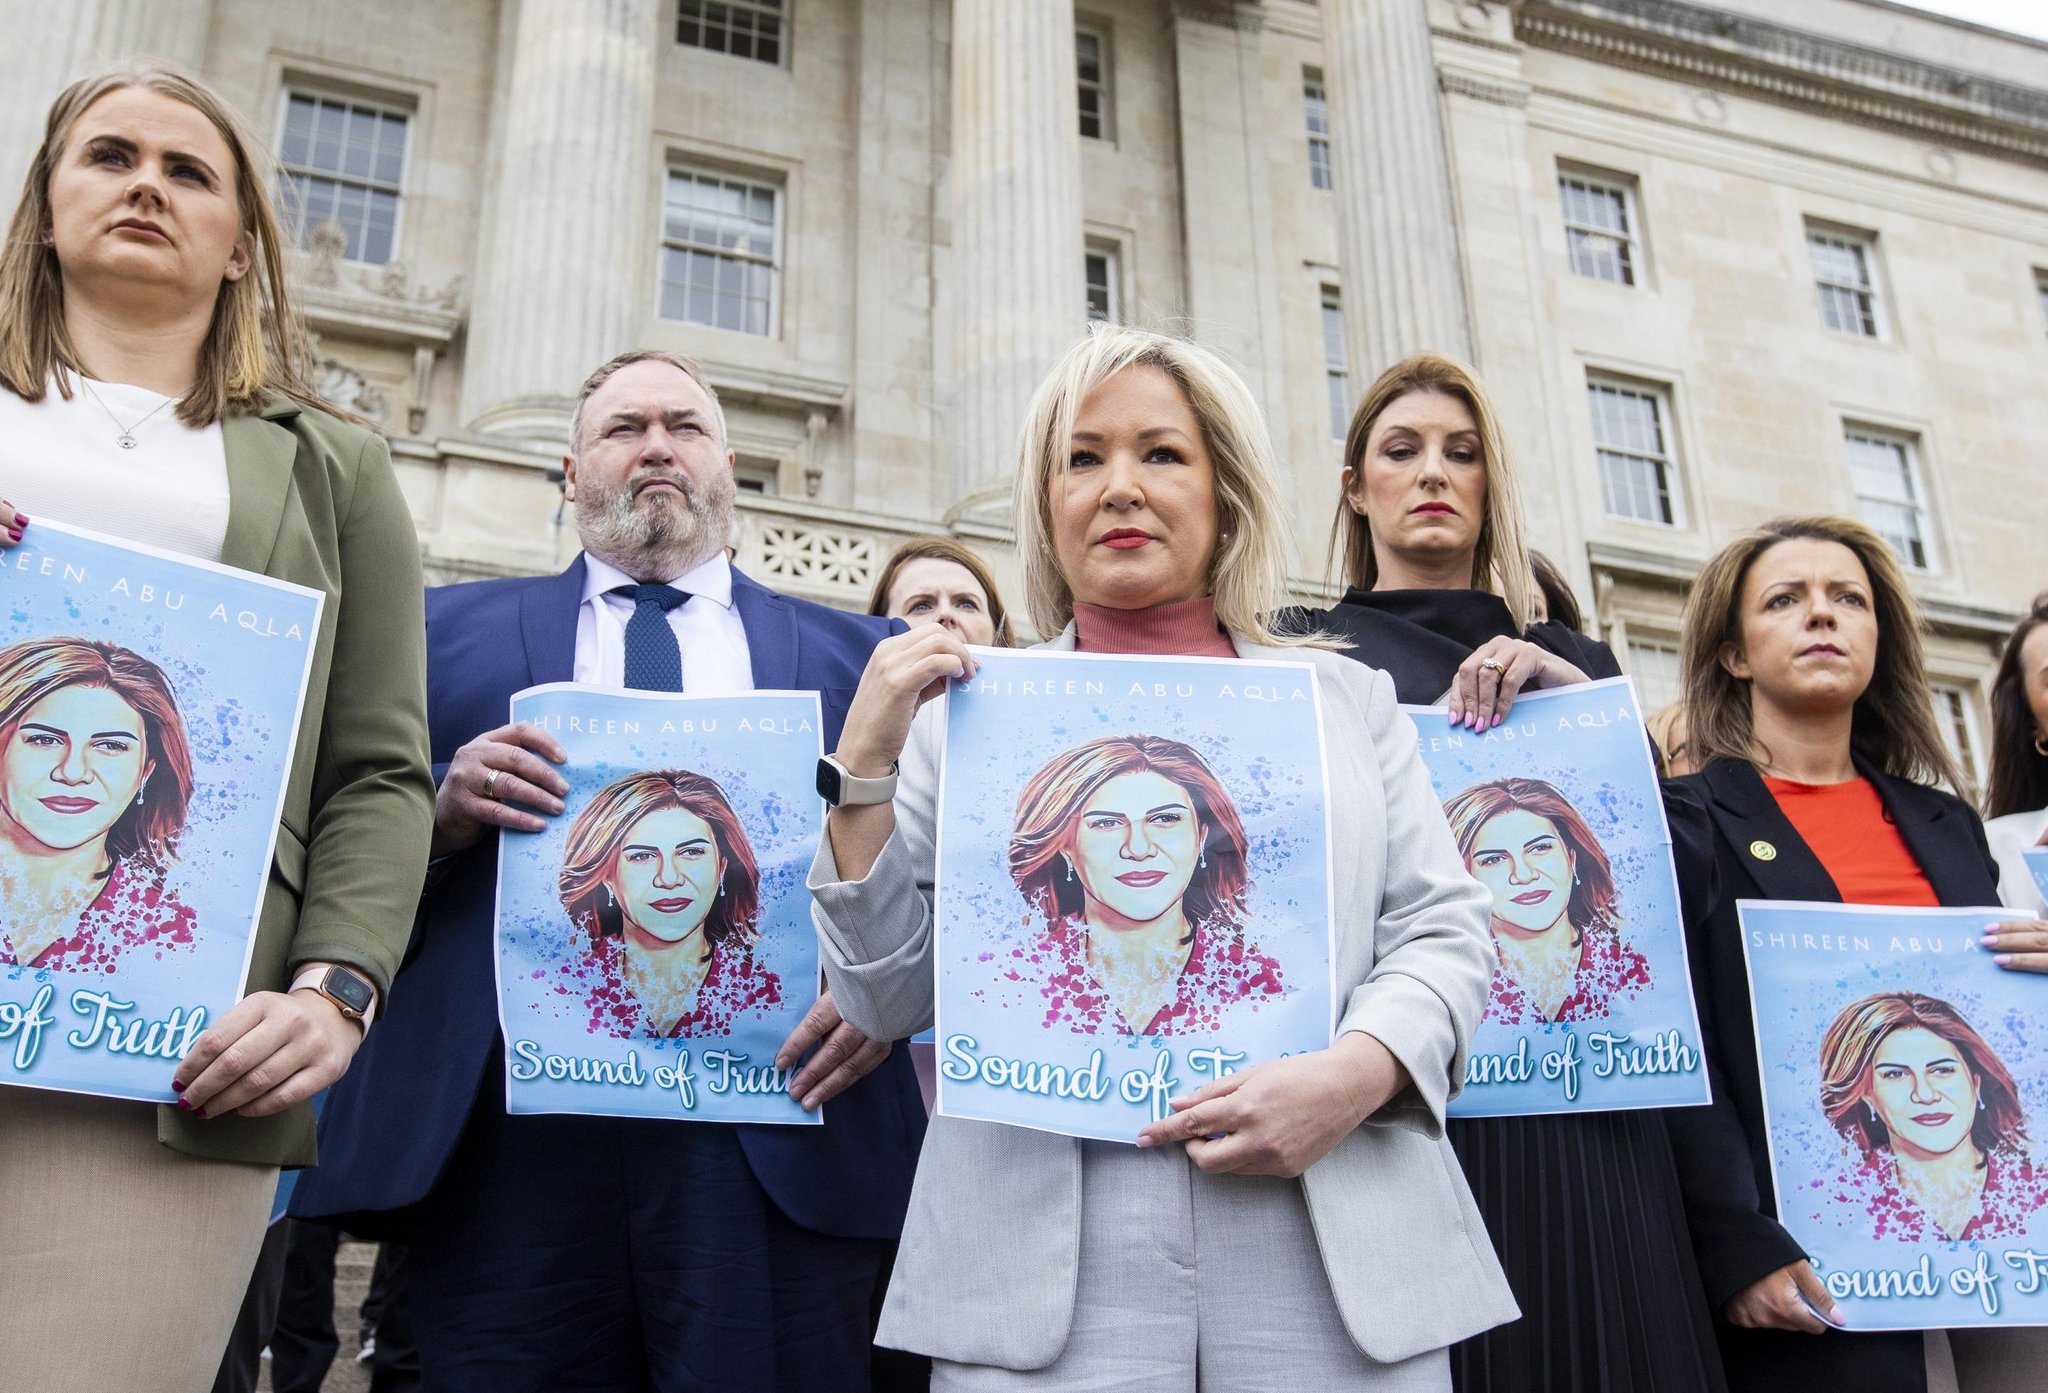 Michelle O'Neill: DUP 'disgracefully holding the public to ransom'